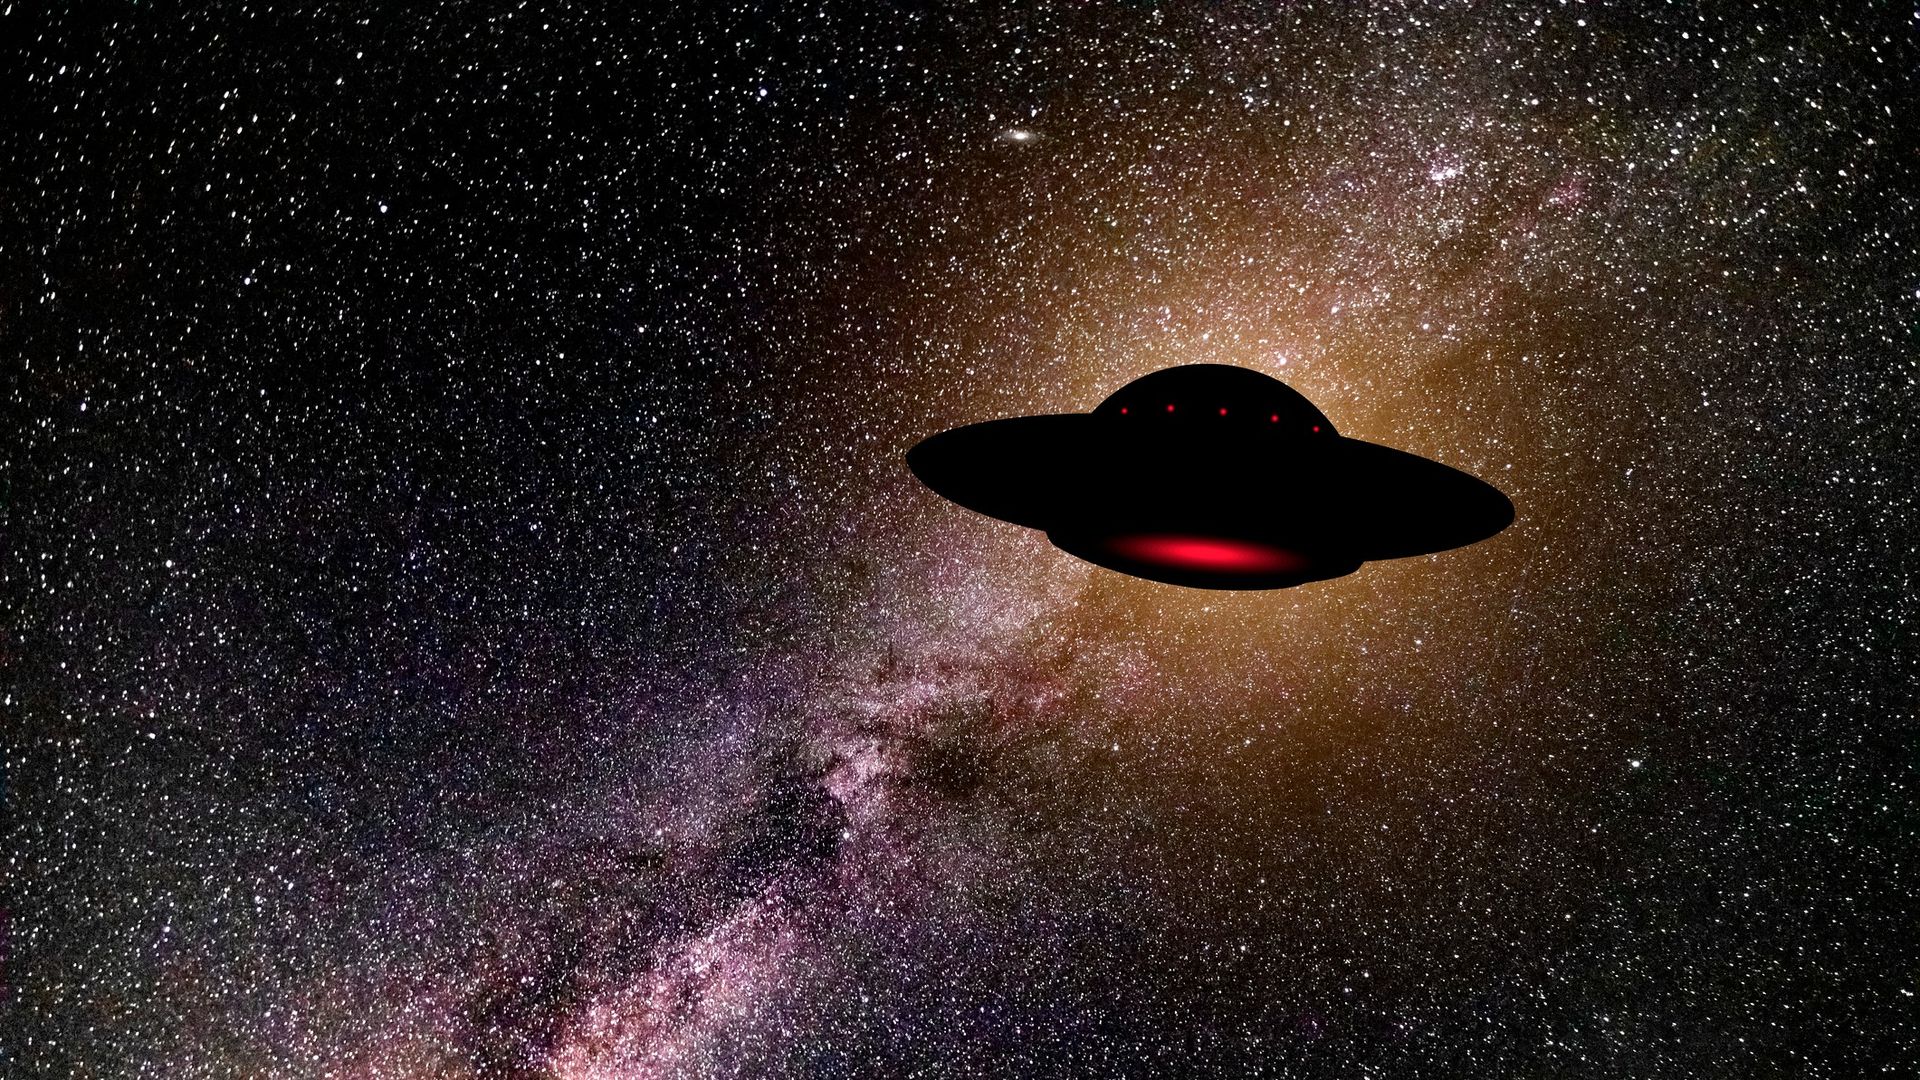 An illustration of a flying saucer looking pitch-black against the starry n...